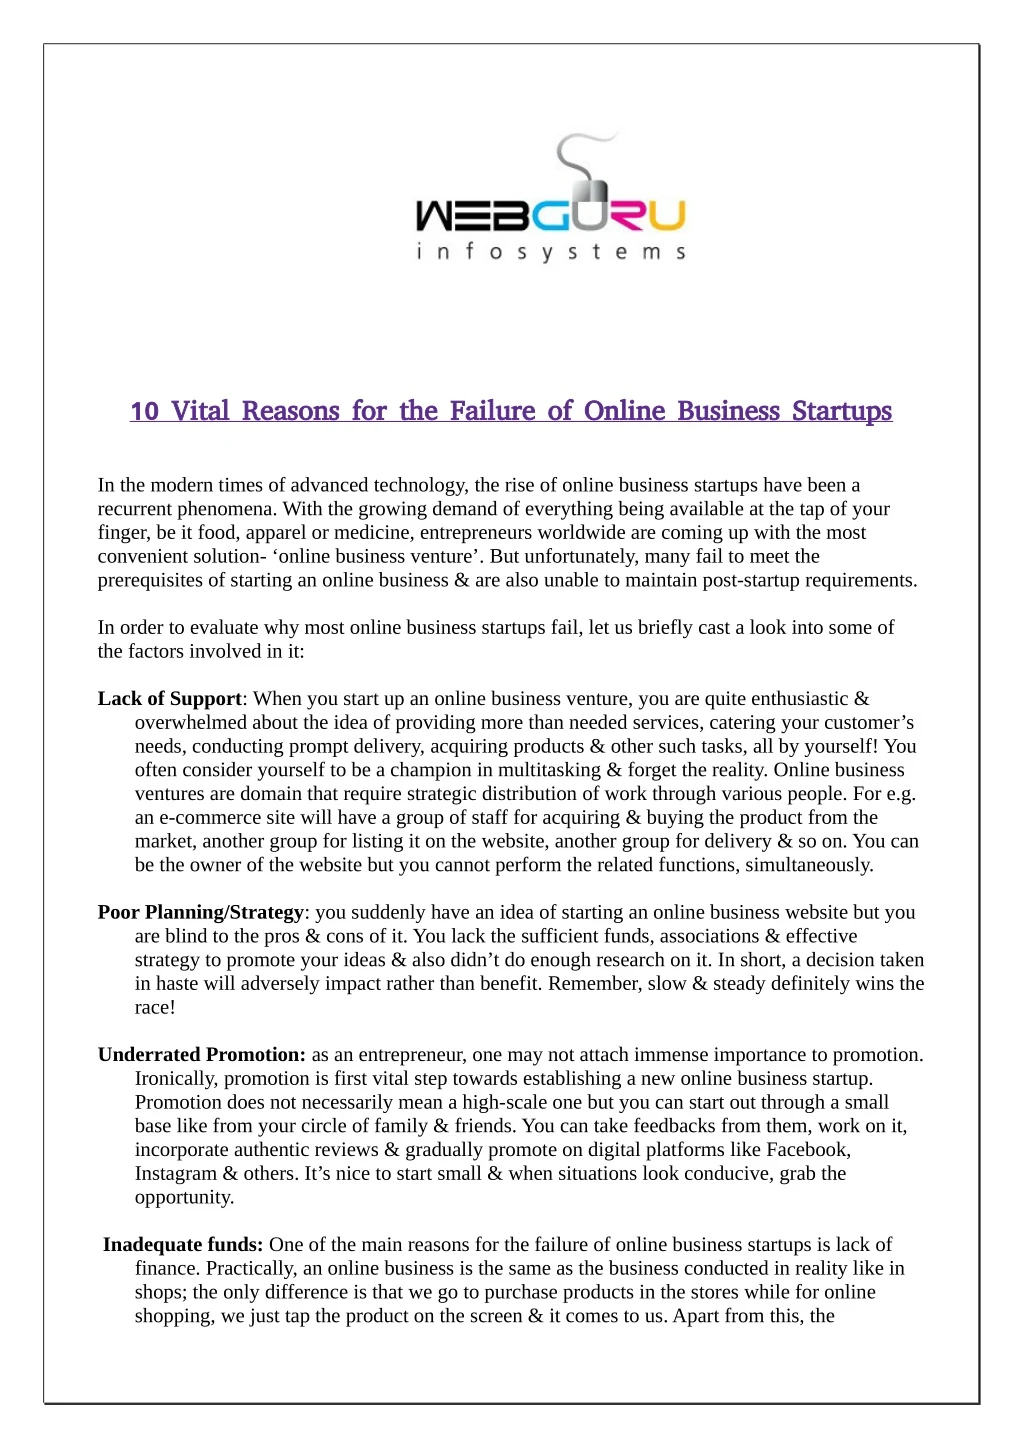 10 vital reasons for the failure of online